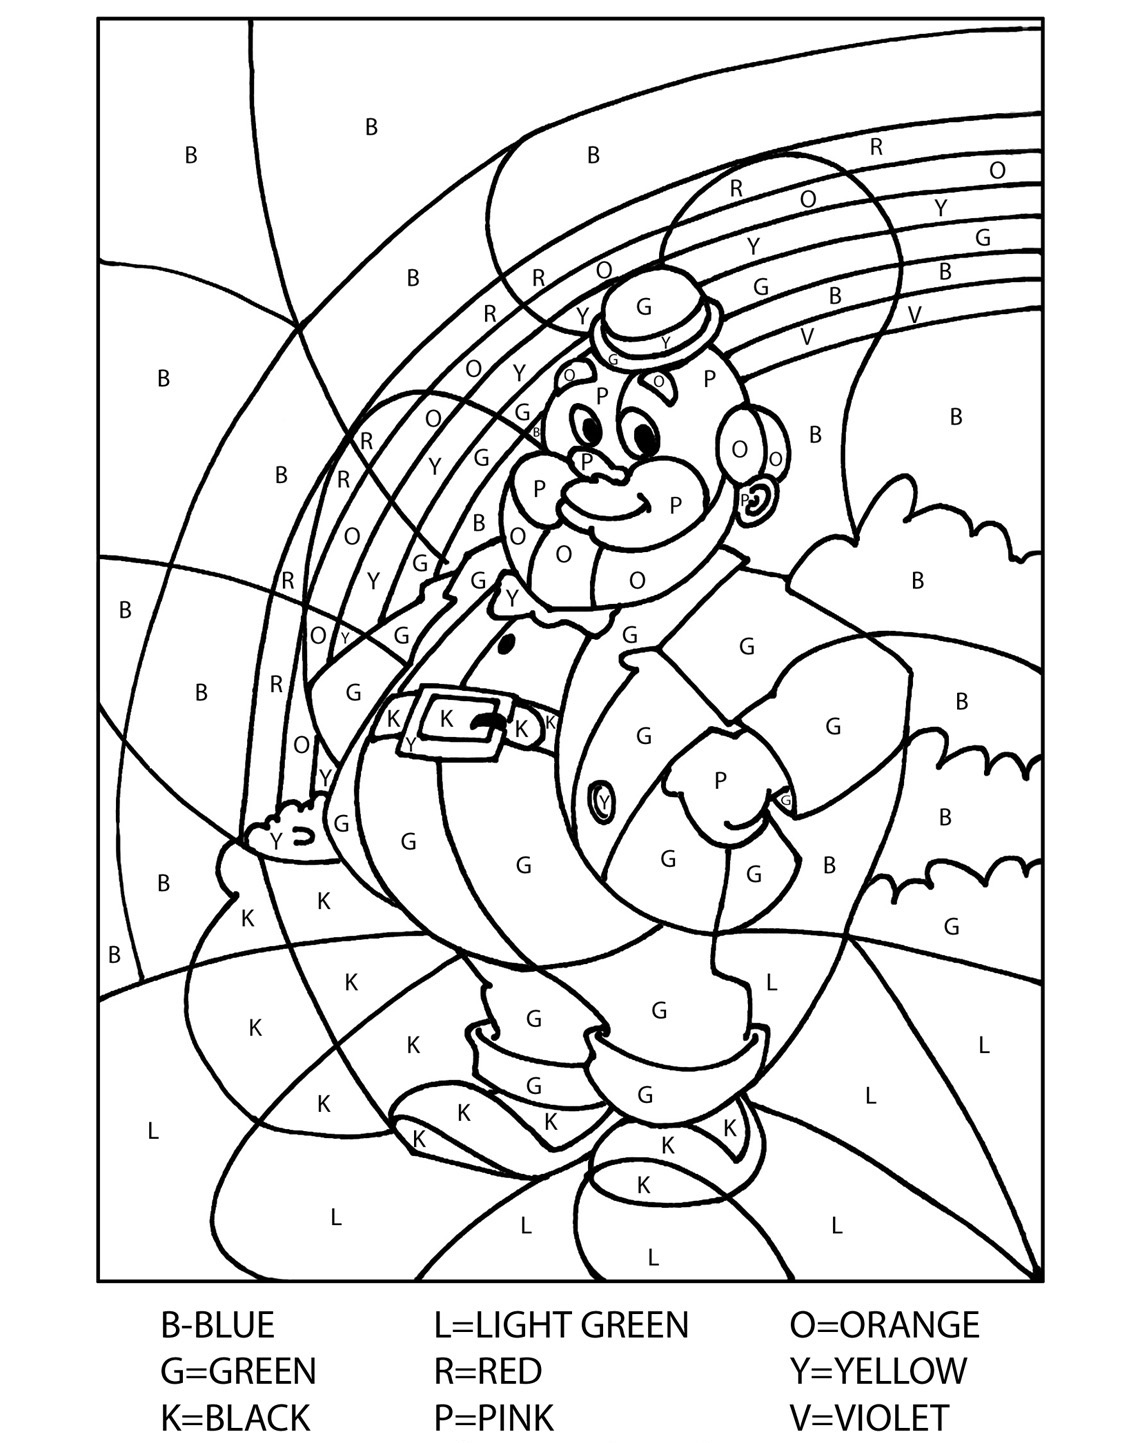 Colorletters Coloring Pages - Best Coloring Pages For Kids